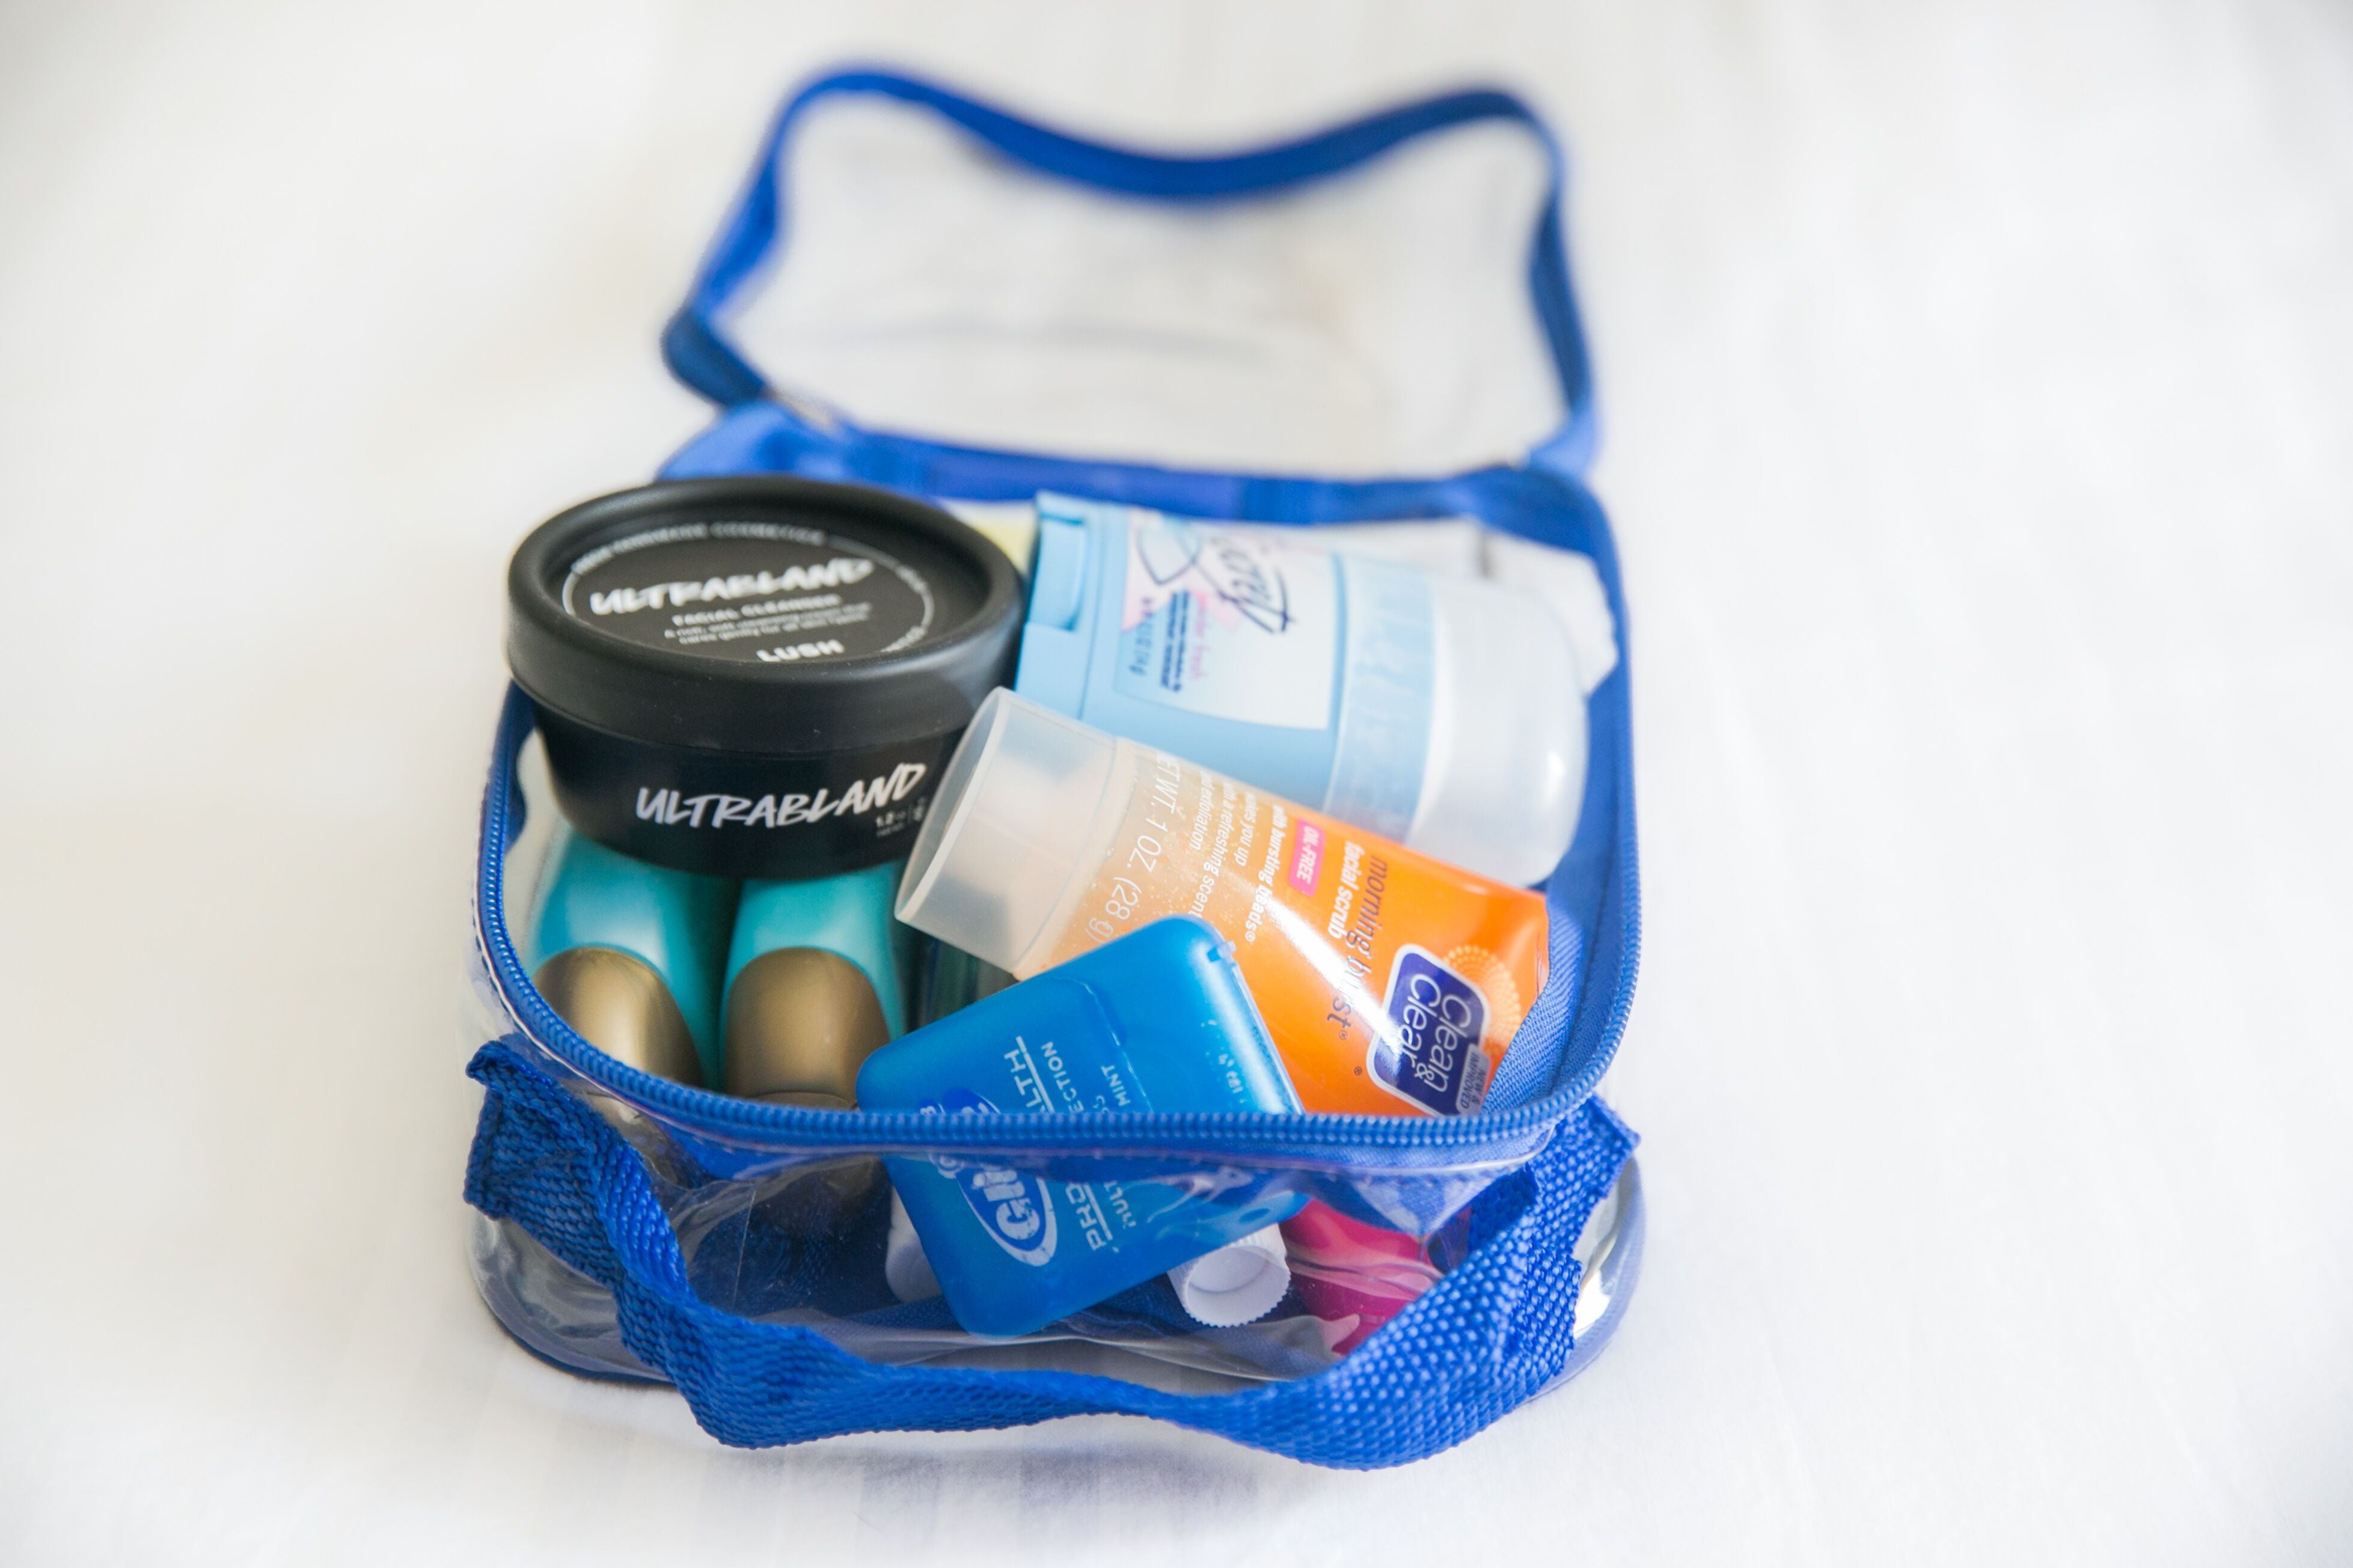 Clear toiletry bag for ski essentials